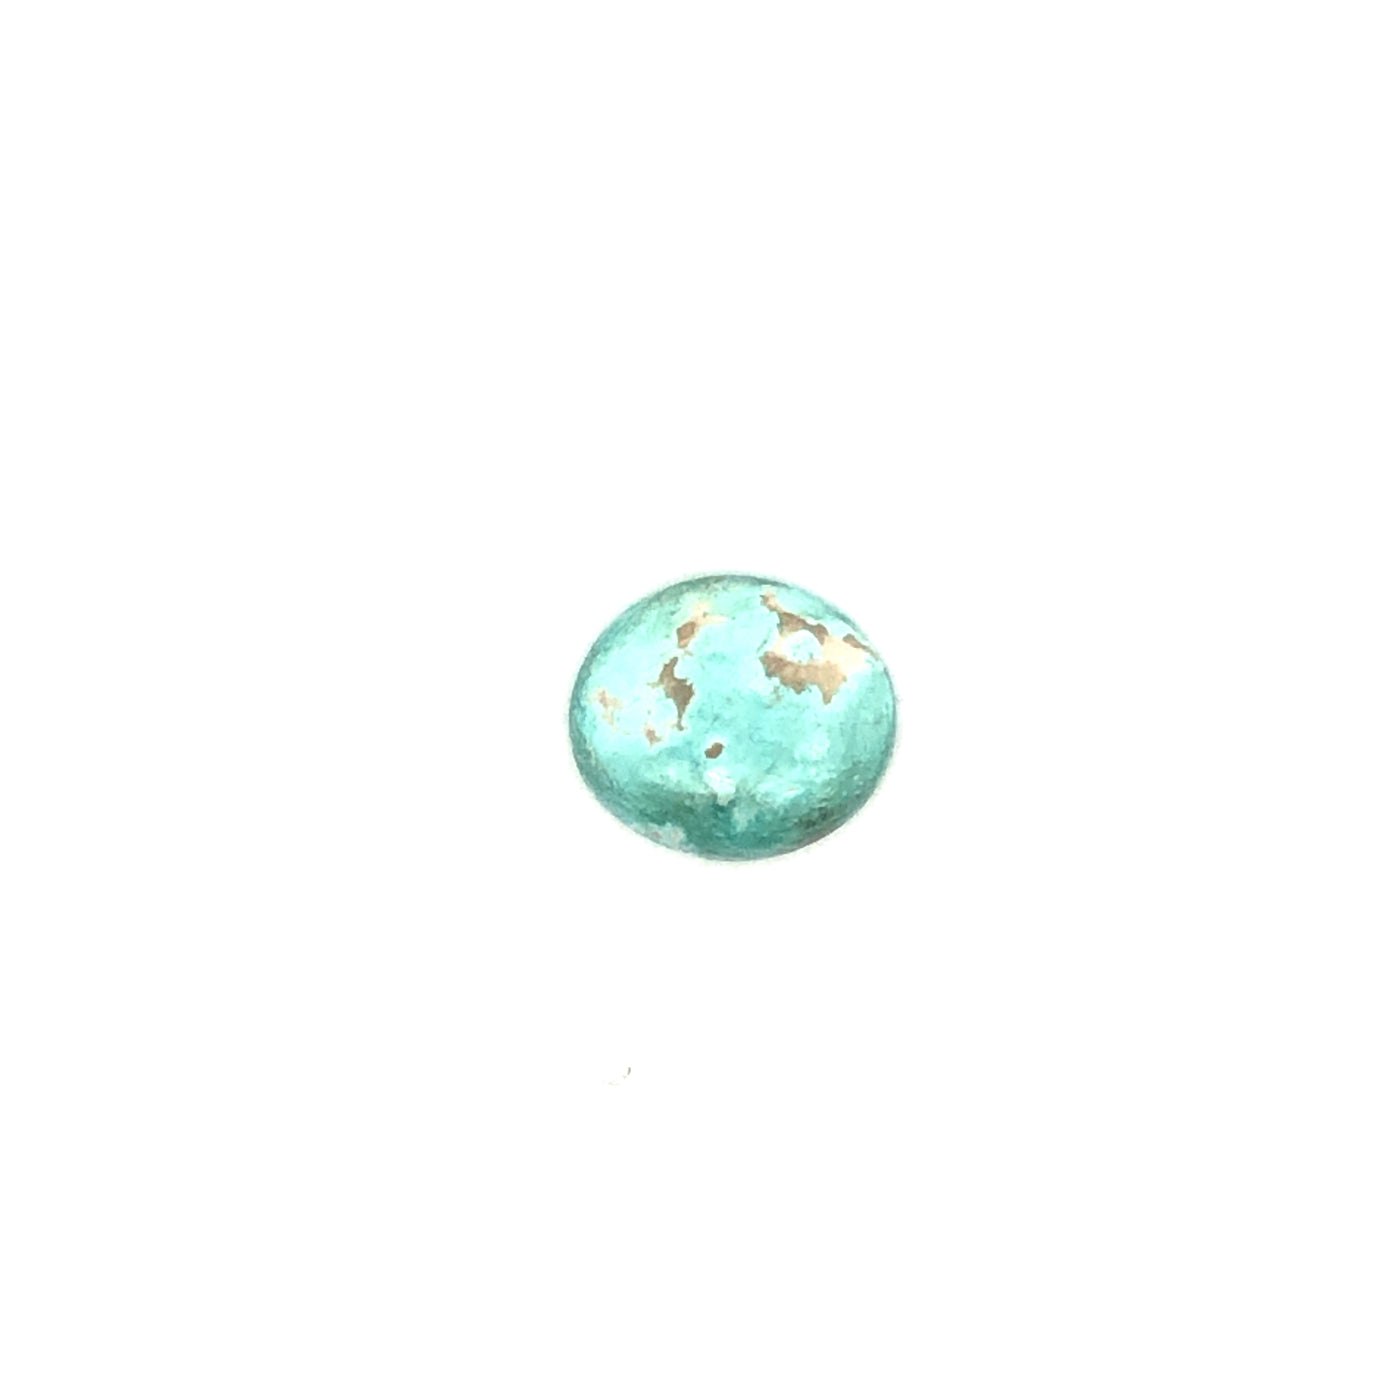 Loose Narooma Turquoise Oval Shaped 5.42Ct Blue With Some White